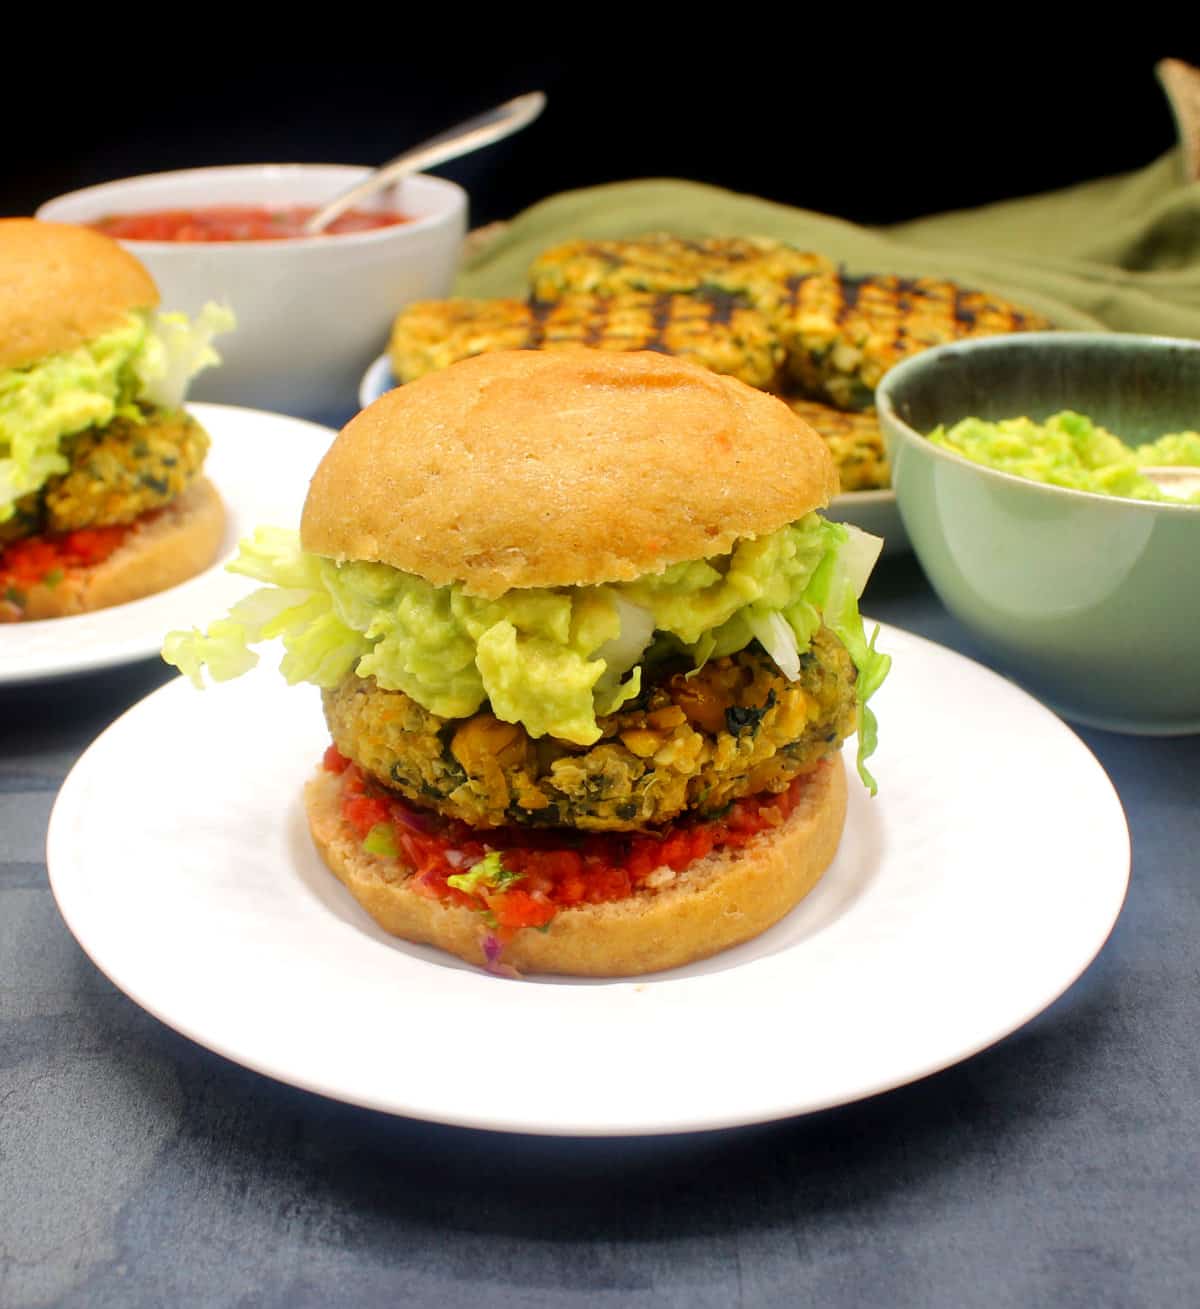 Vegan chickpea quinoa burger on white plate with trimmings in background.